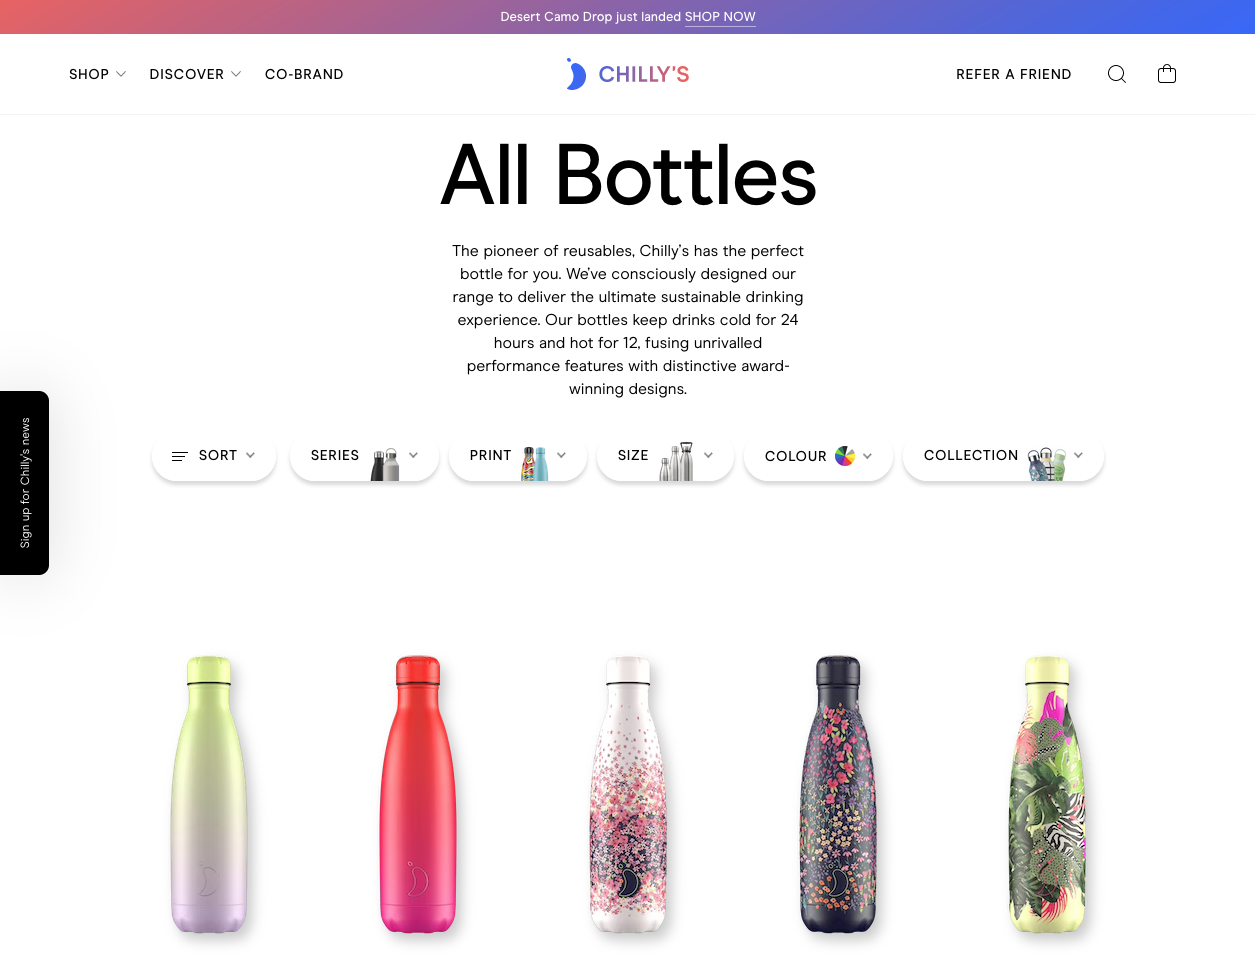 an example of "All Bottles" page from Chilly’s website